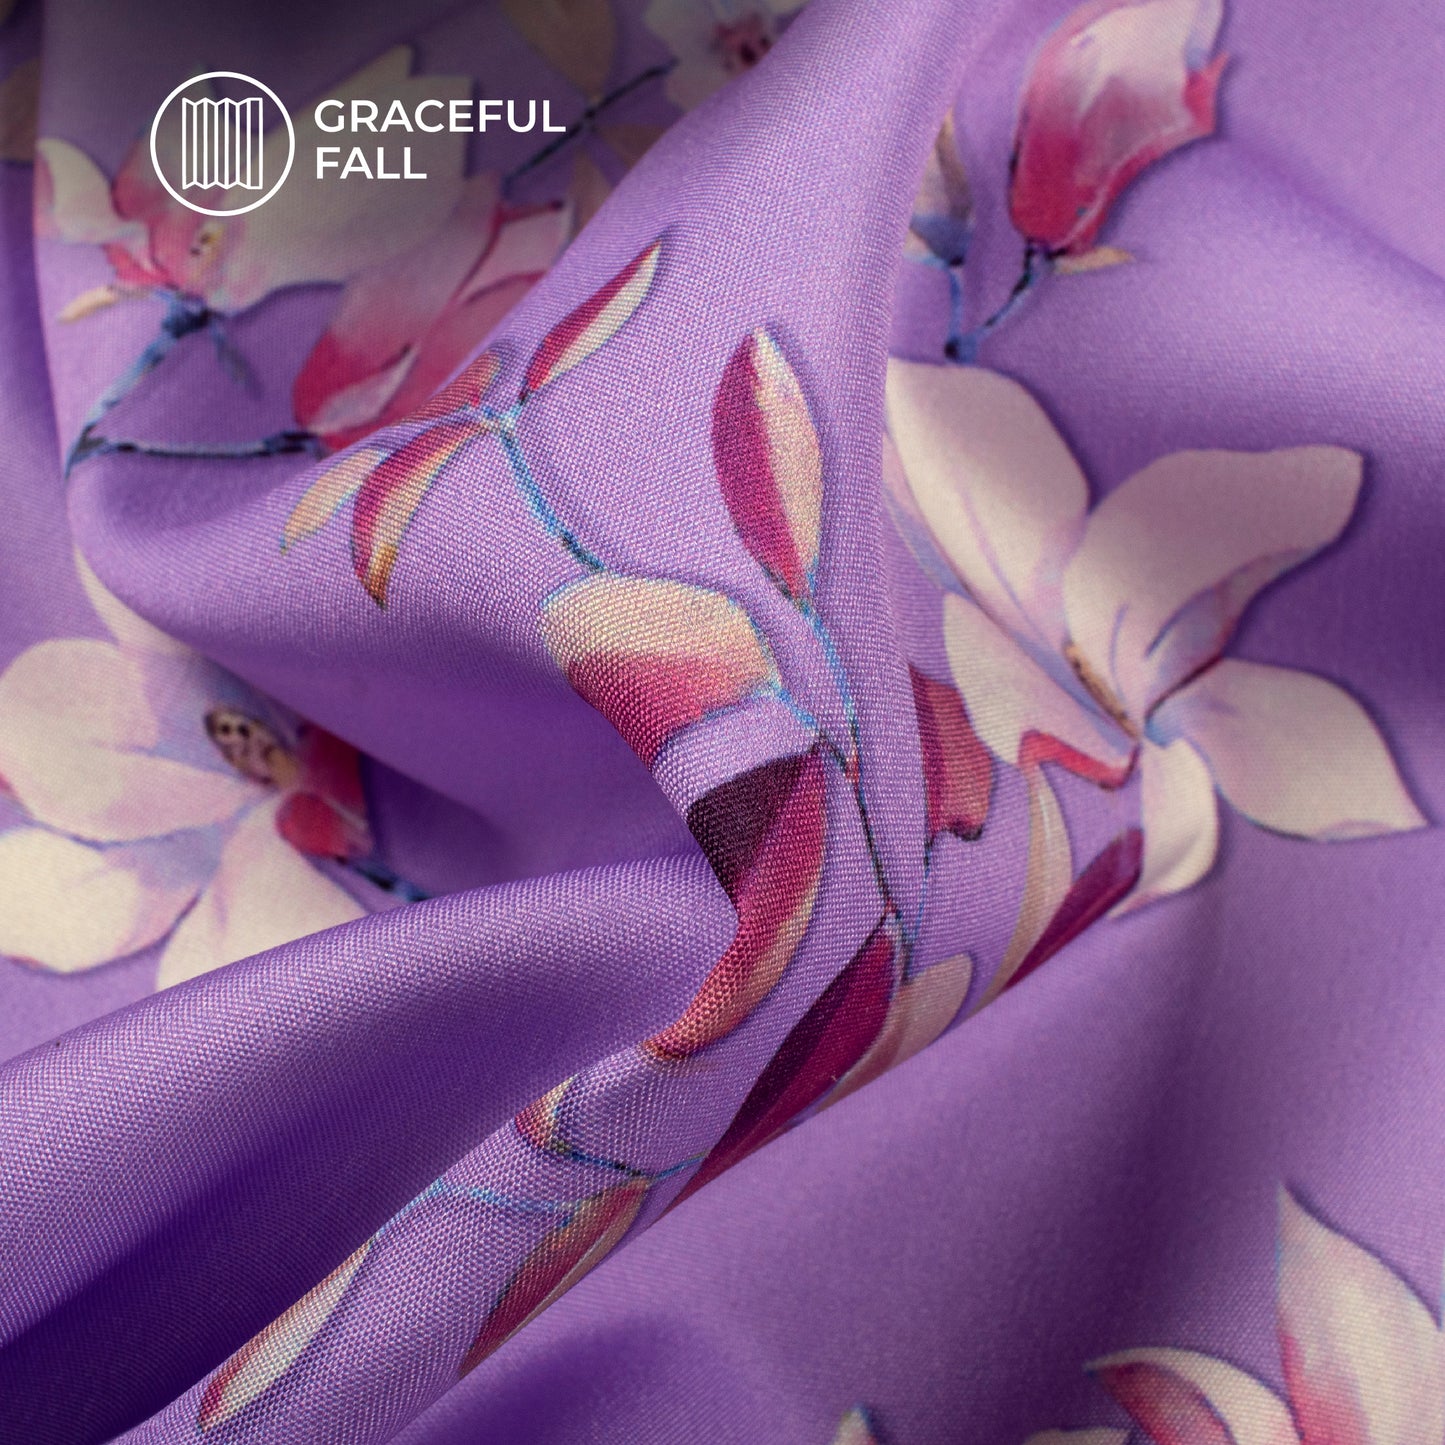 Amethyst Purple And Off White Floral Digital Print Butter Crepe Fabric